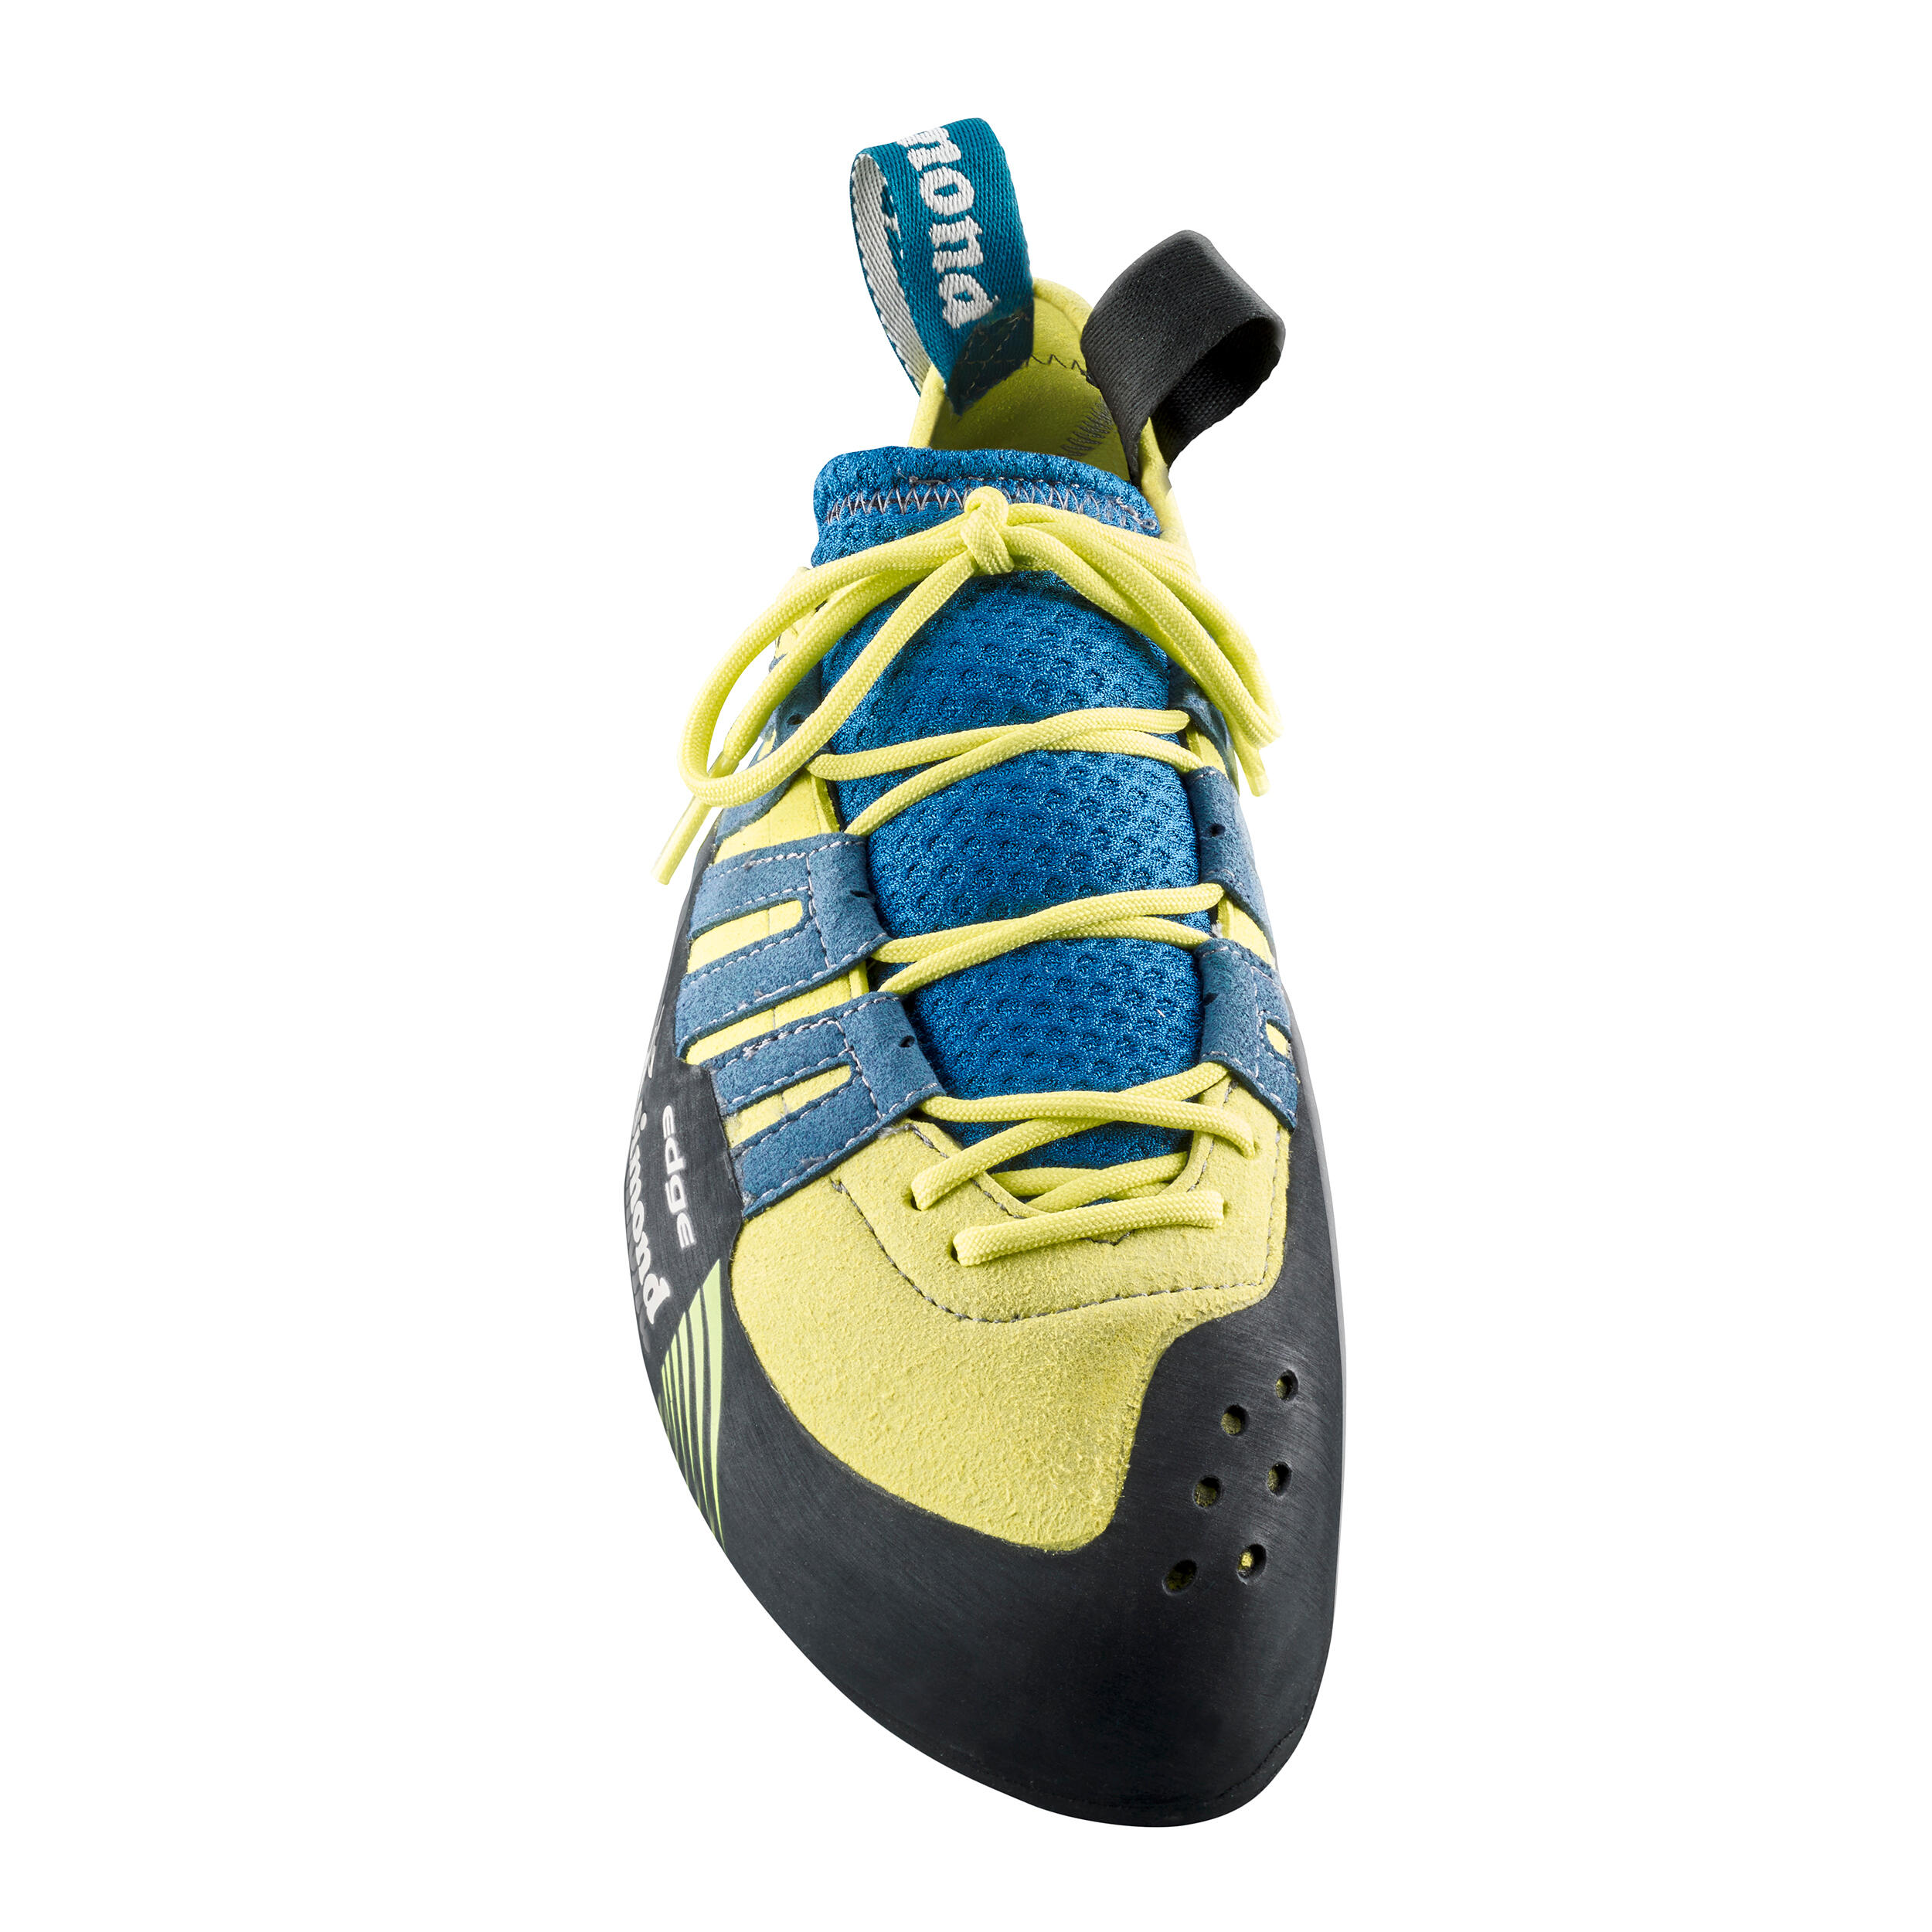 CLIMBING SHOES EDGE LACES V2 - ANISEED/BLUE 9/13